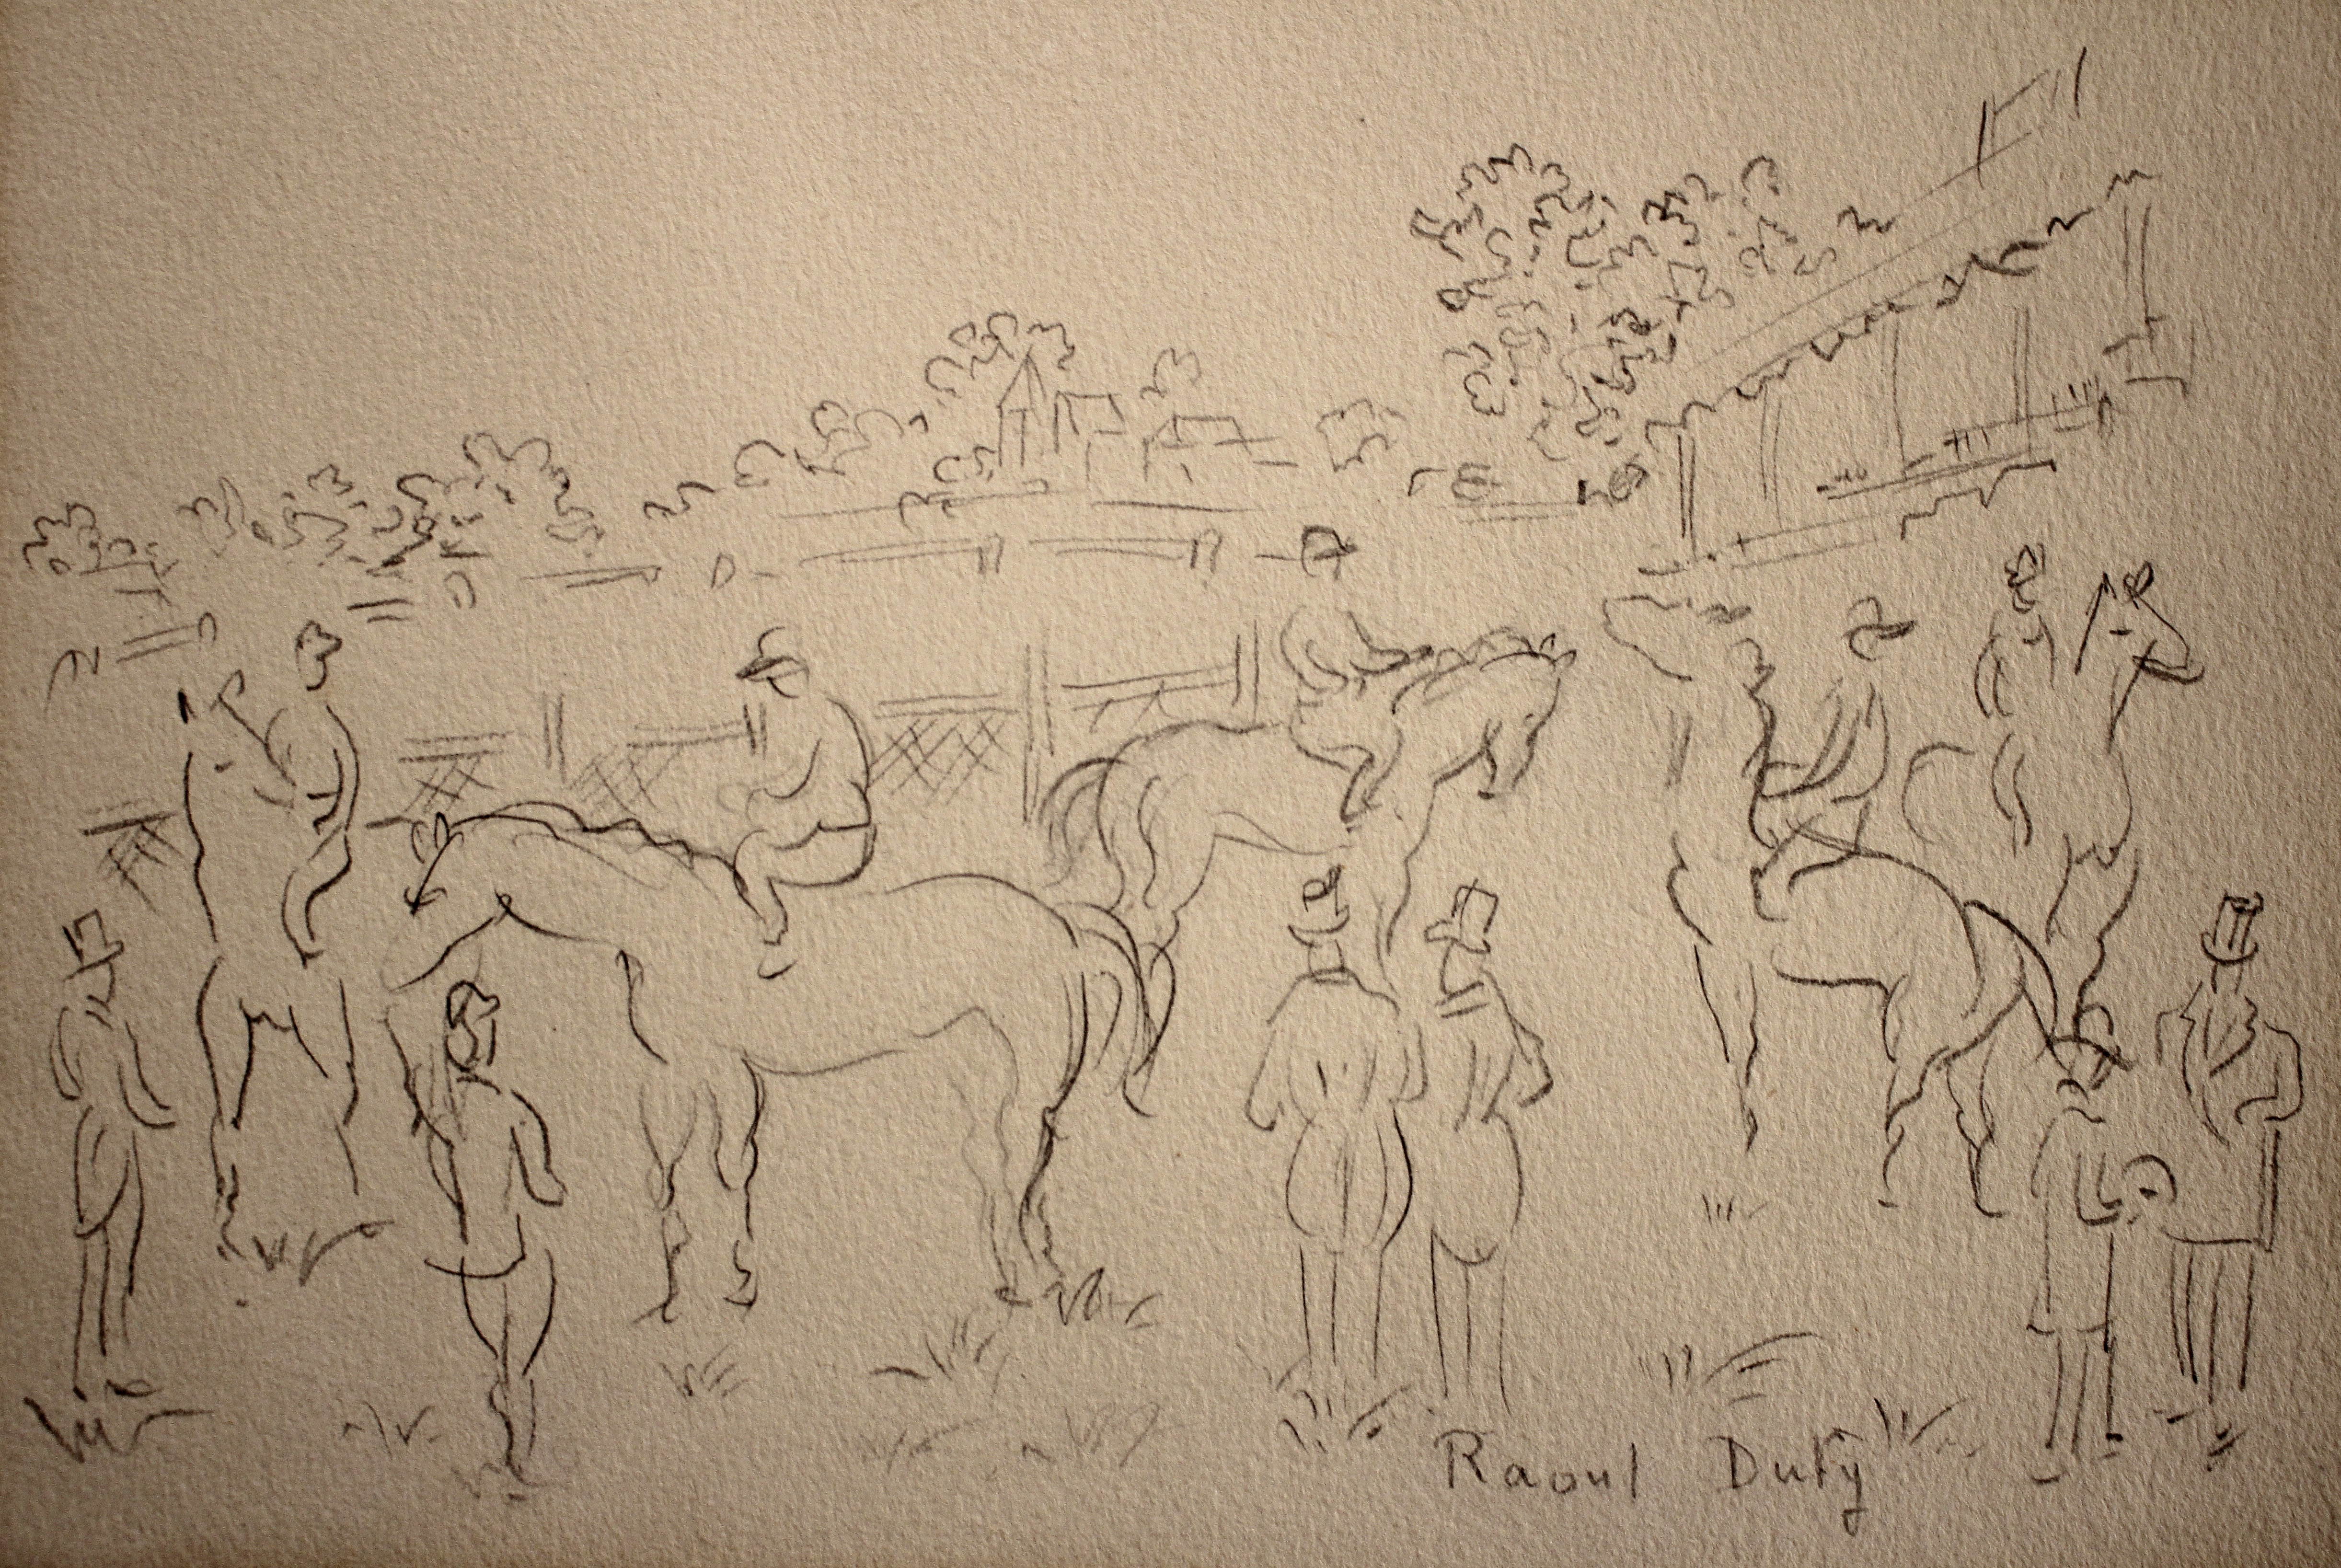 Raoul Dufy, French, 1877-1953, Figures At The Racetrack, Drawing. Estimate $3,000-5,000